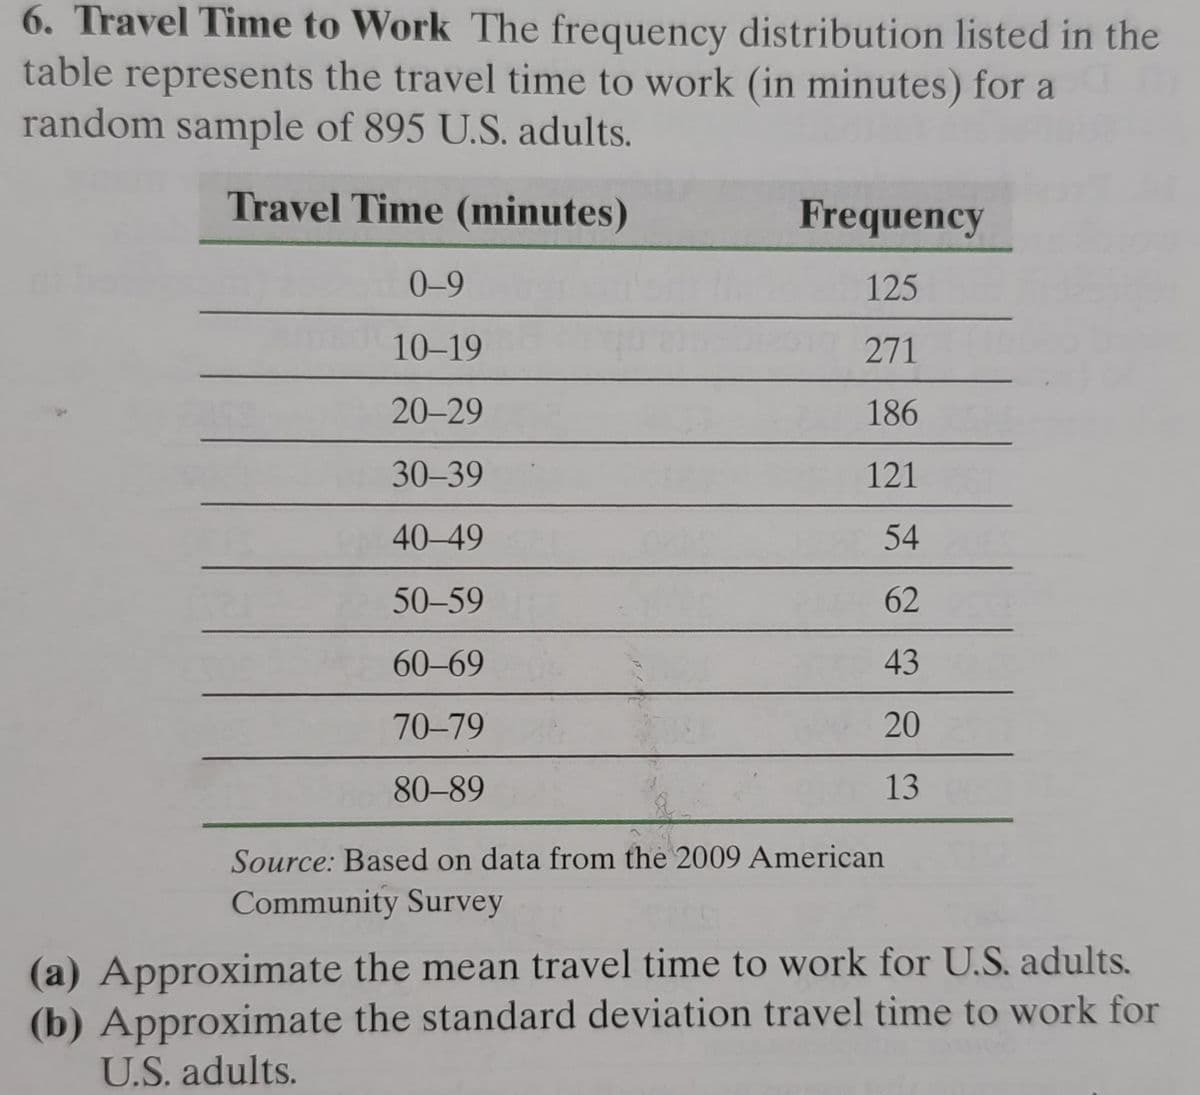 6. Travel Time to Work The frequency distribution listed in the
table represents the travel time to work (in minutes) for a
random sample of 895 U.S. adults.
Travel Time (minutes)
Frequency
0-9
125
10–19
271
20-29
186
30-39
121
40-49
54
50-59
62
60-69
43
70-79
20
80-89
13
Source: Based on data from the 2009 American
Community Survey
(a) Approximate the mean travel time to work for U.S. adults.
(b) Approximate the standard deviation travel time to work for
U.S. adults.
